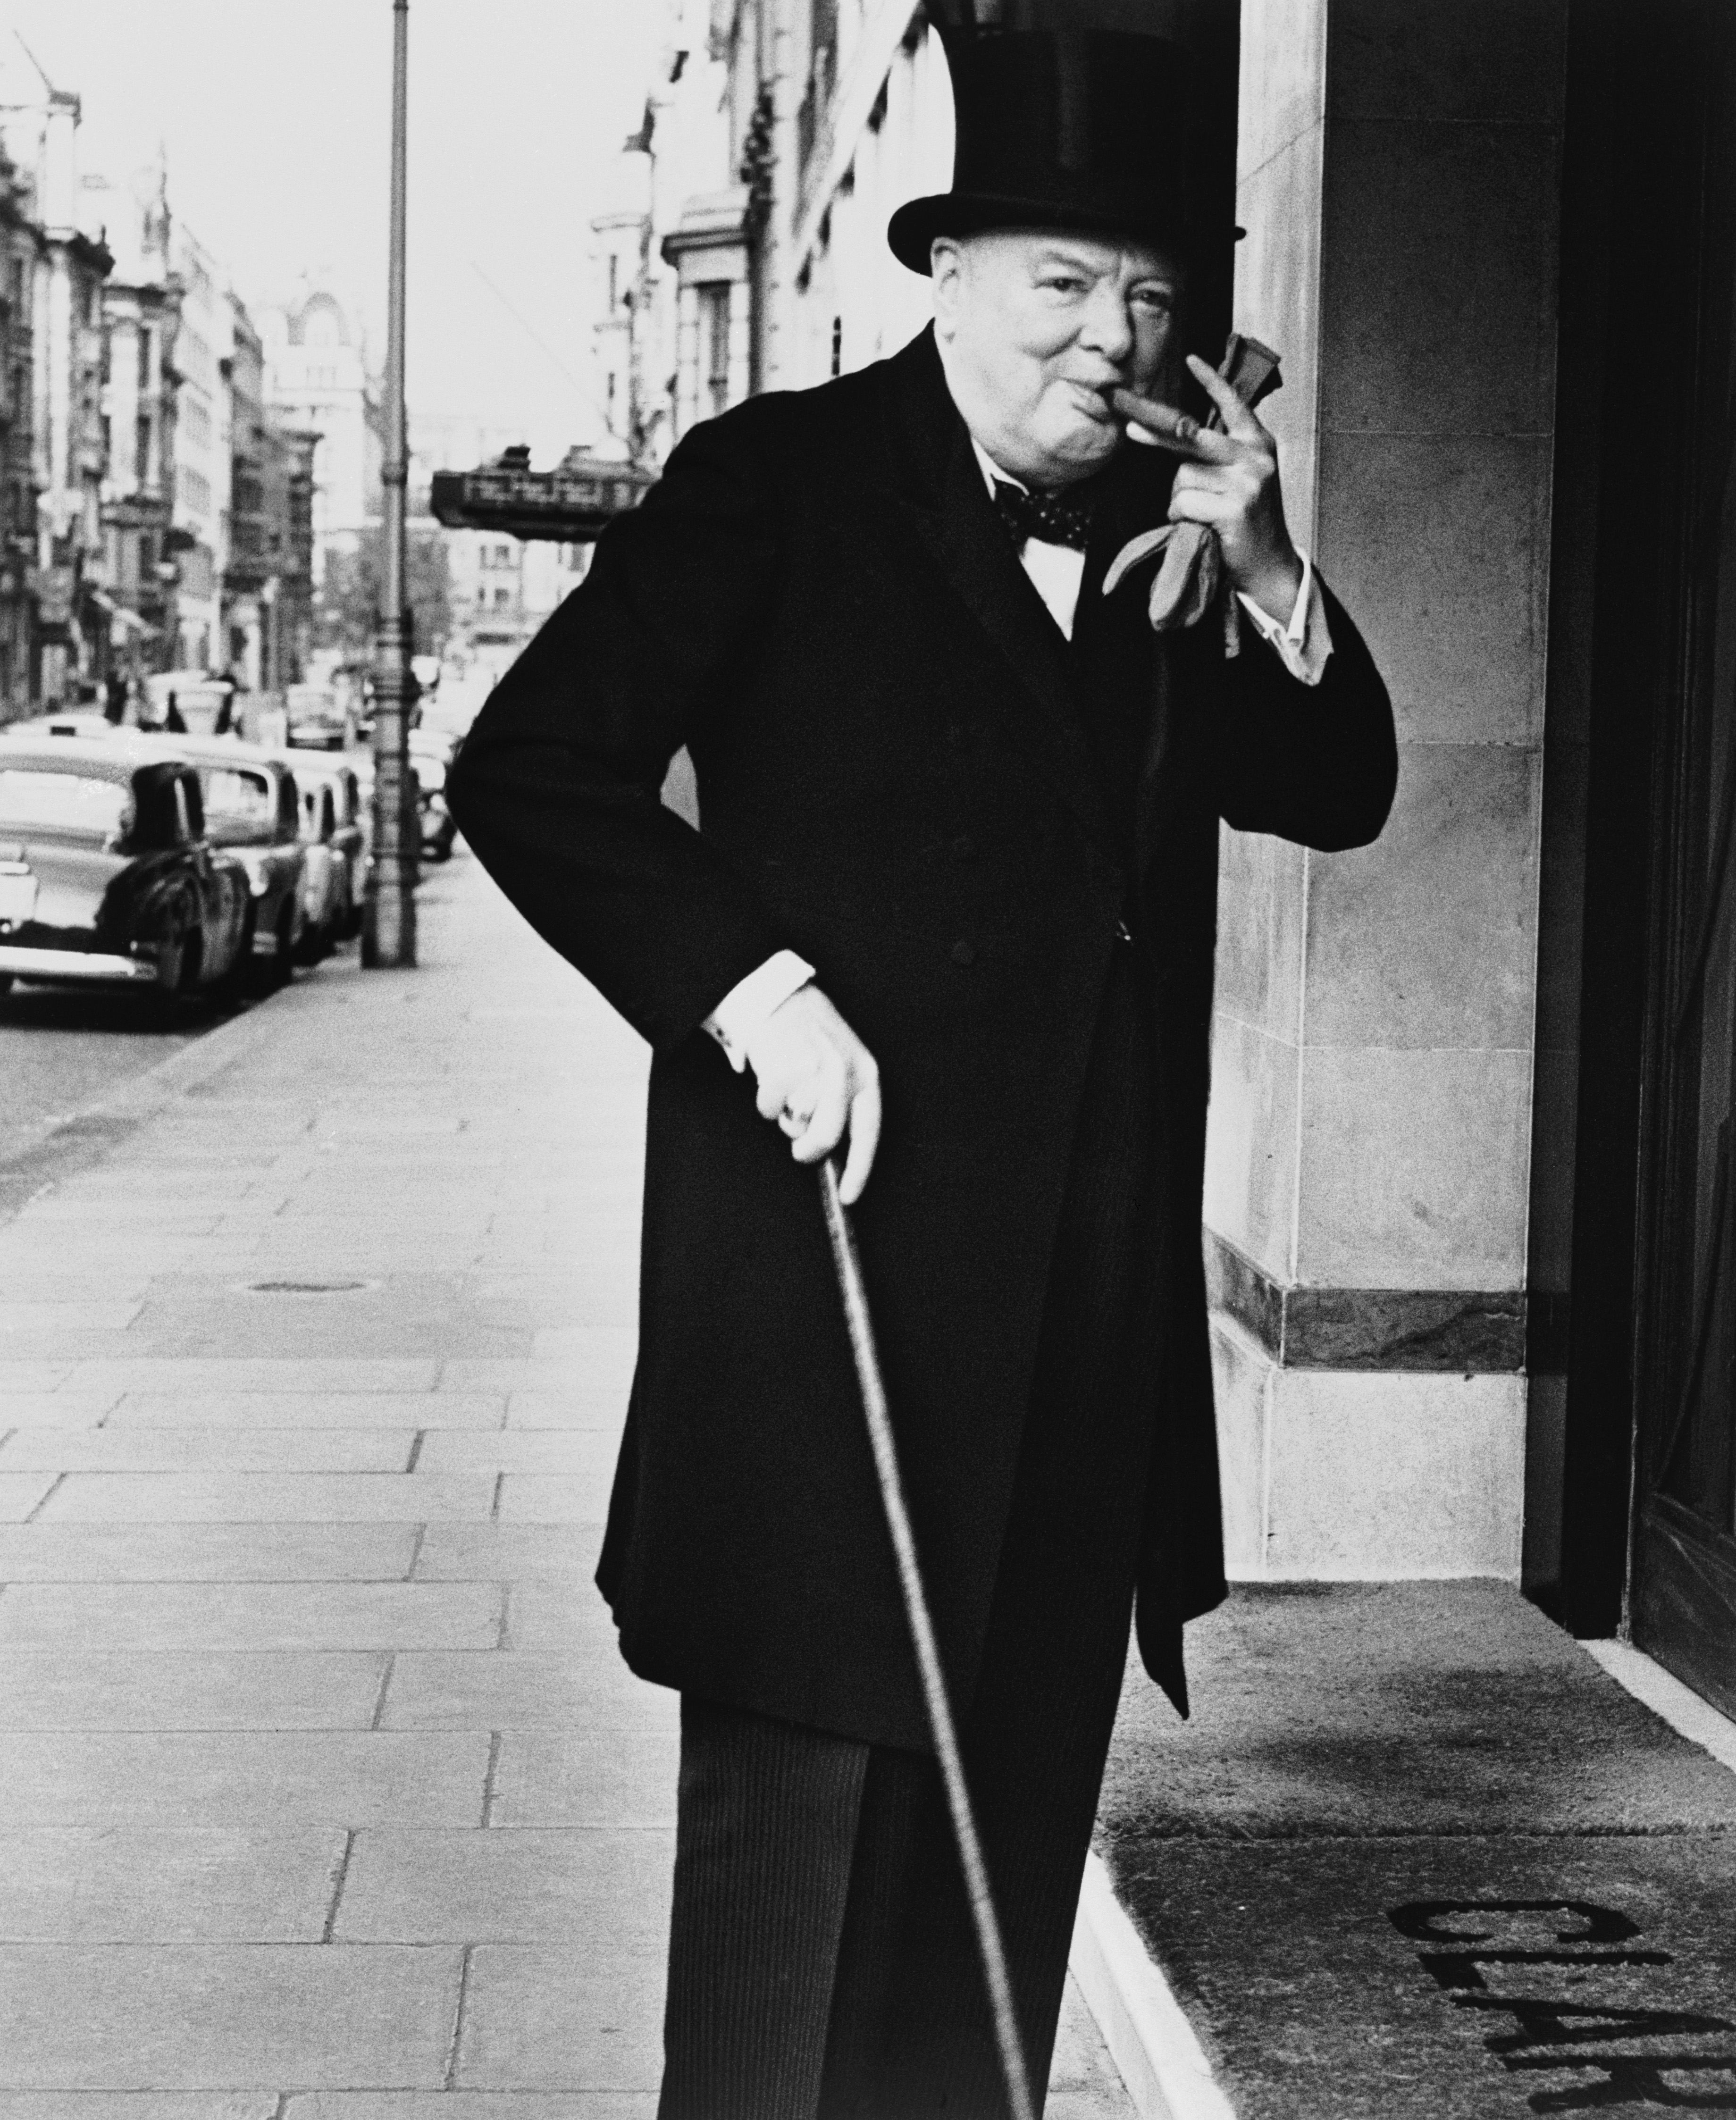 British prime minister Winston Churchill (1874 - 1965) arrives at Claridges Hotel in London, 13th May 1952. (Photo by Keystone/Getty Images)